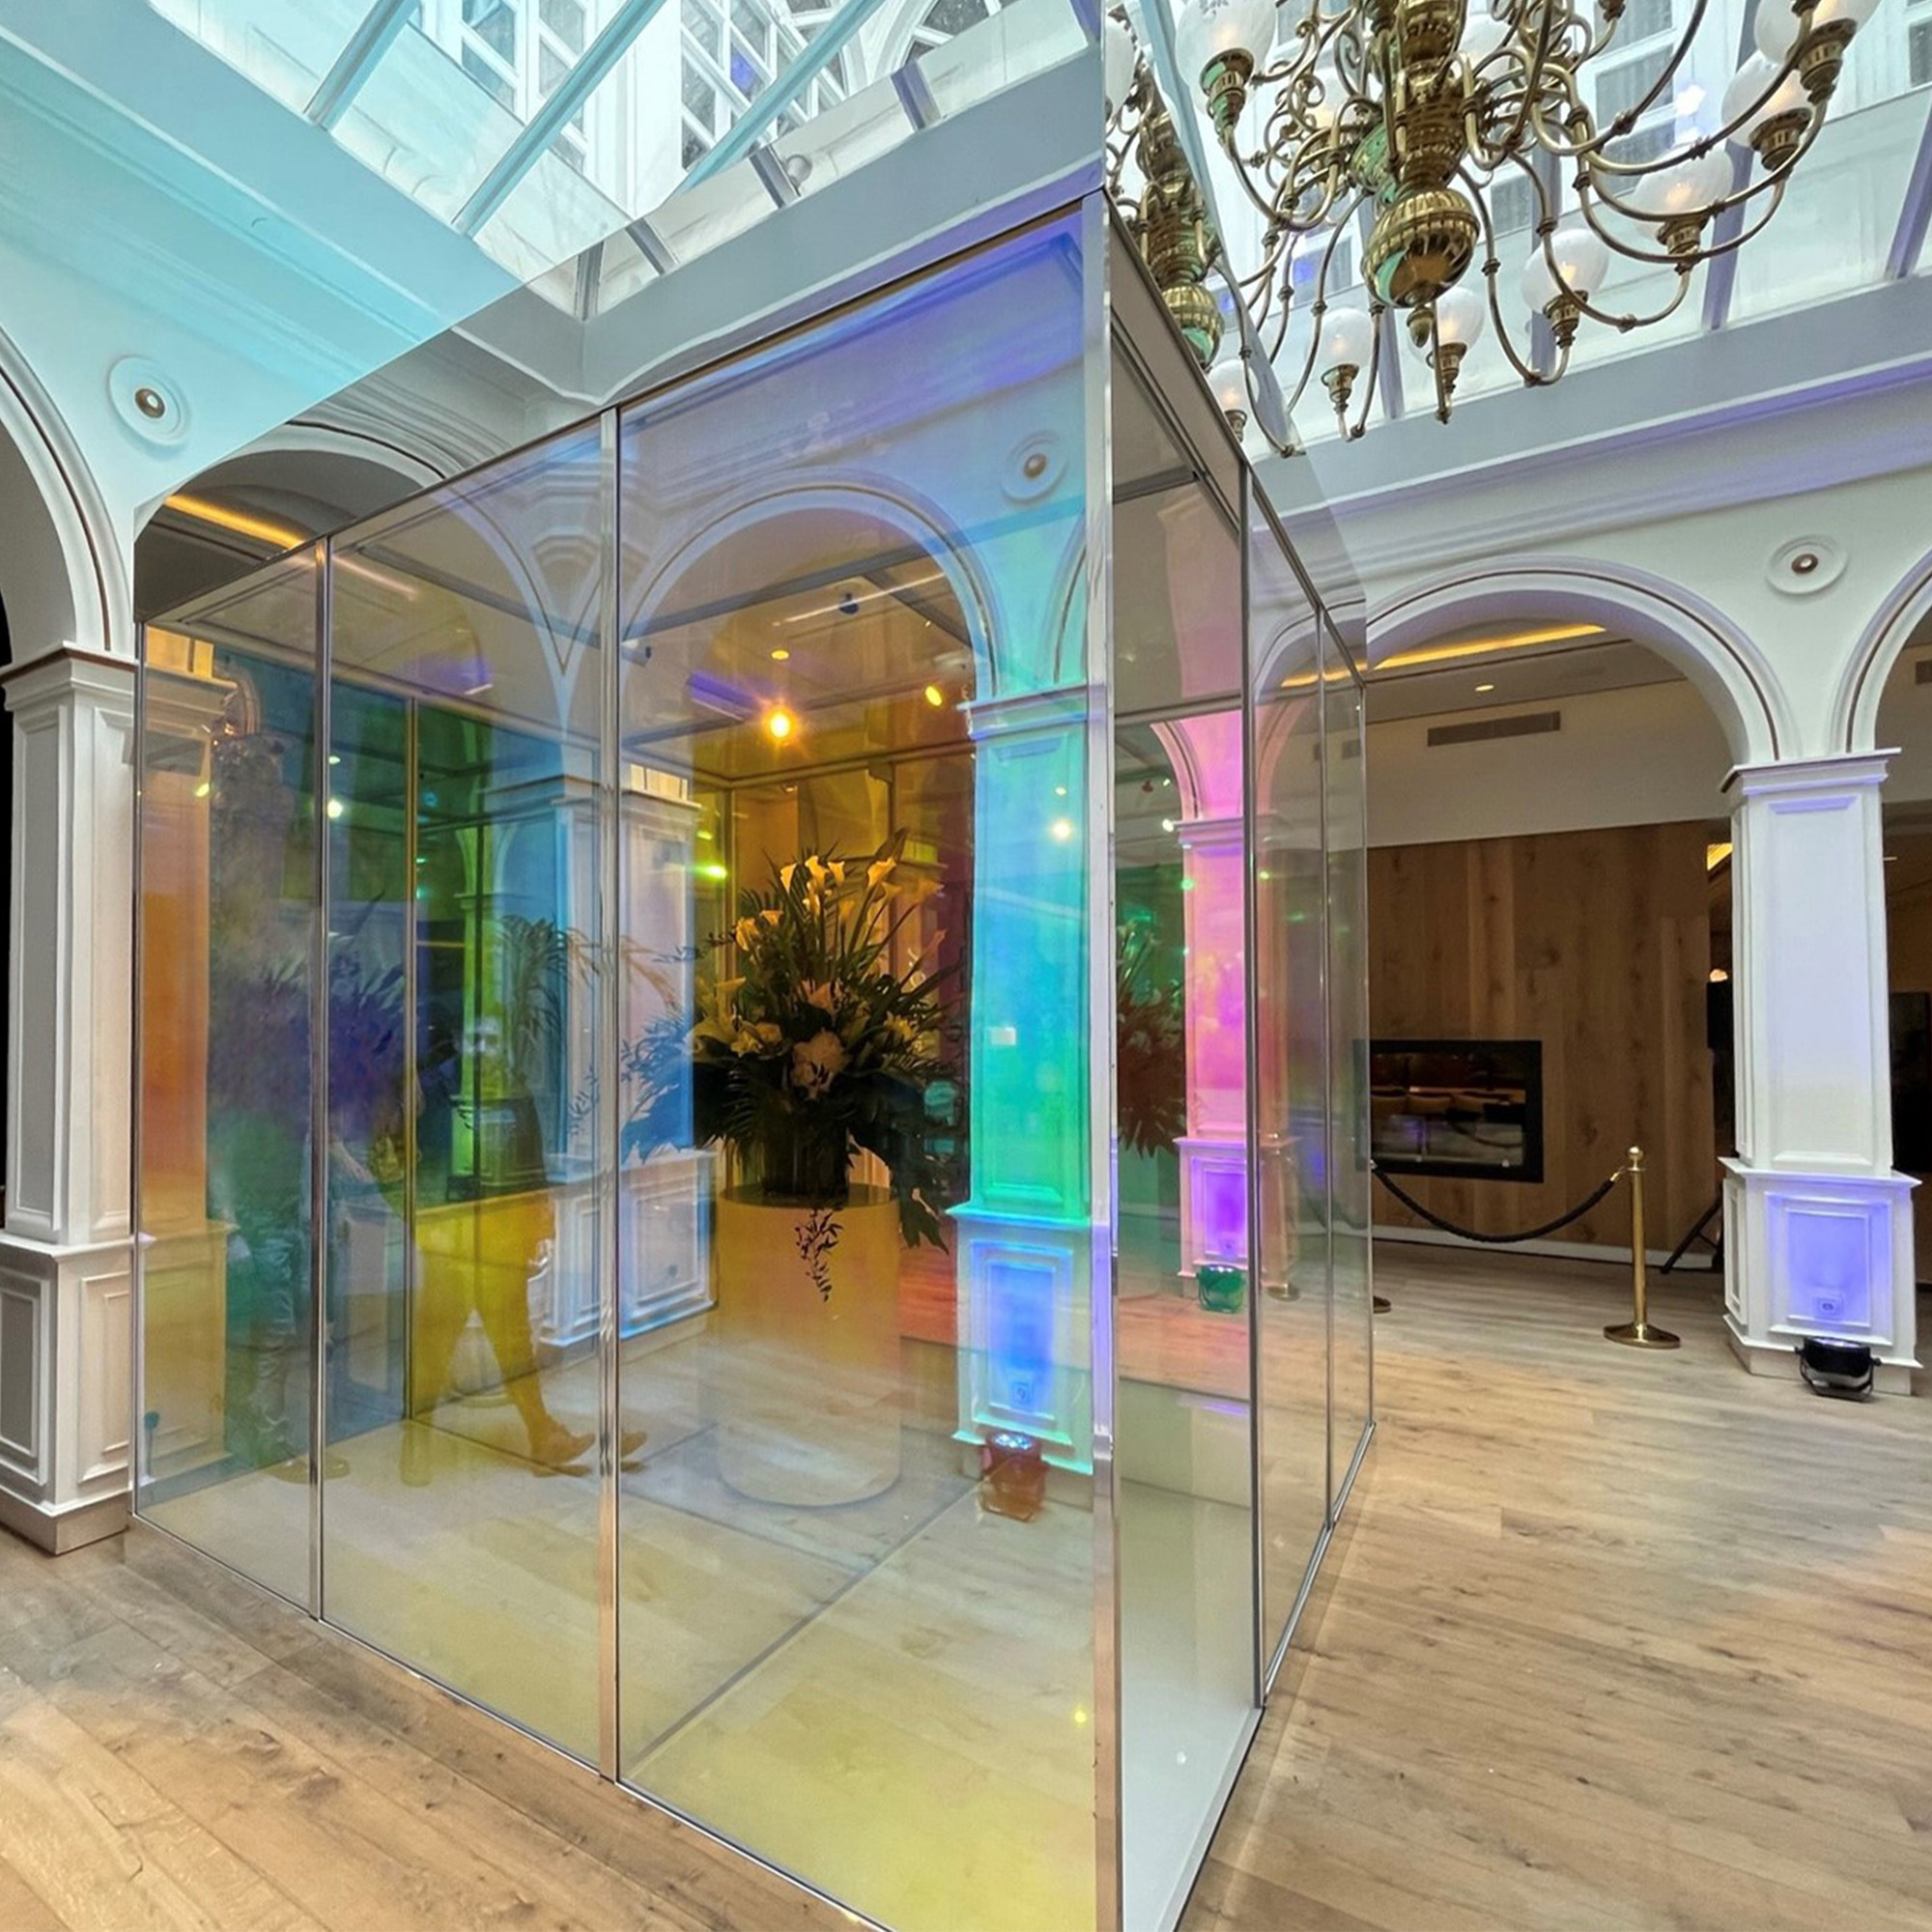 Clear glass room-size cube surrounded by round archways inside a building under a chandelier.